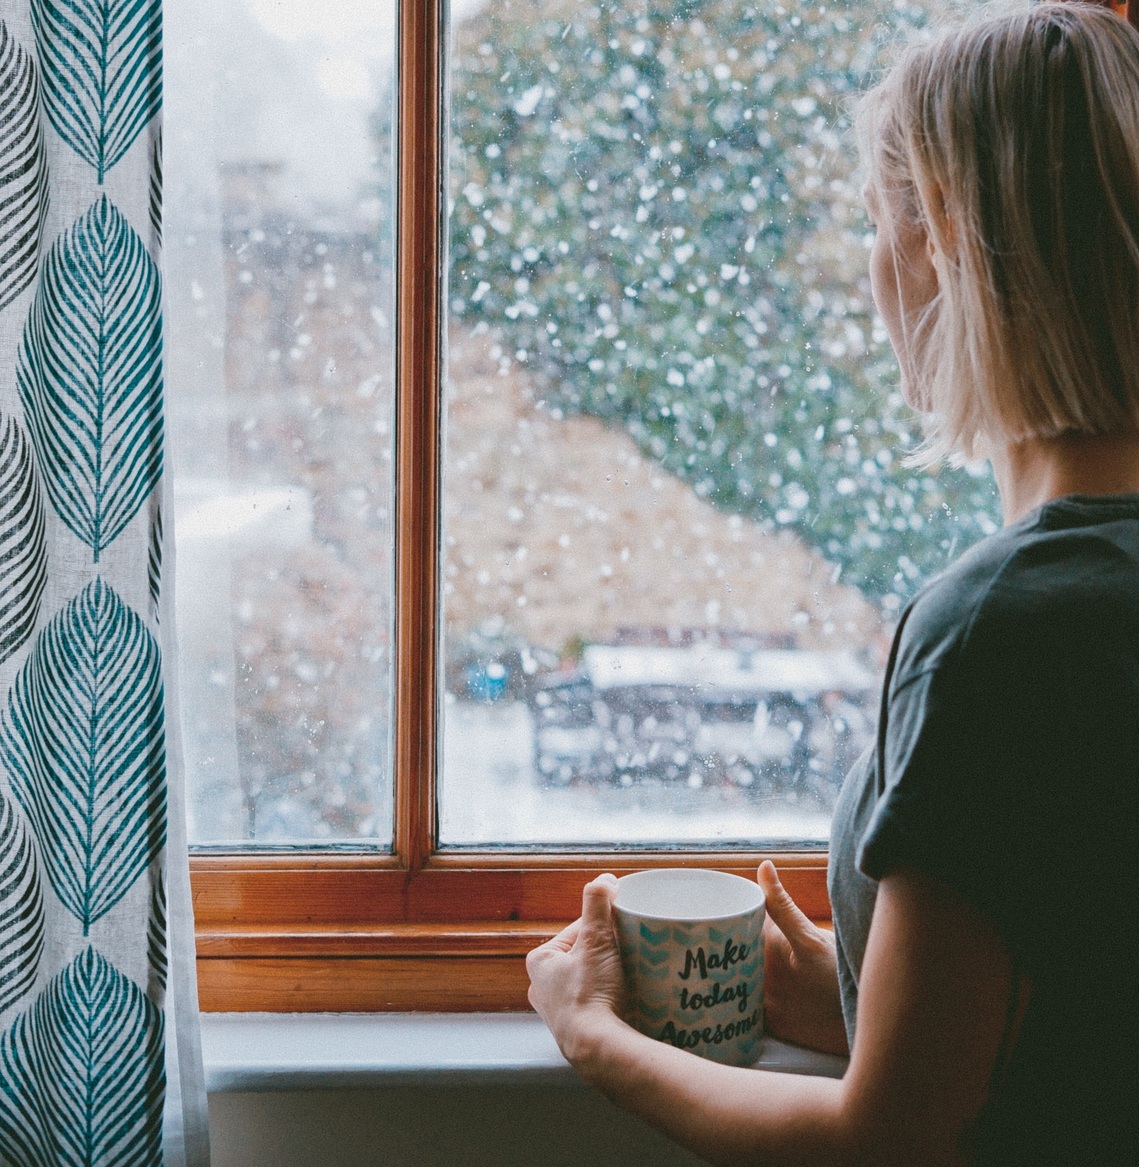 A woman with her back to the camera looking out a window at snow falling with a mug in her hands